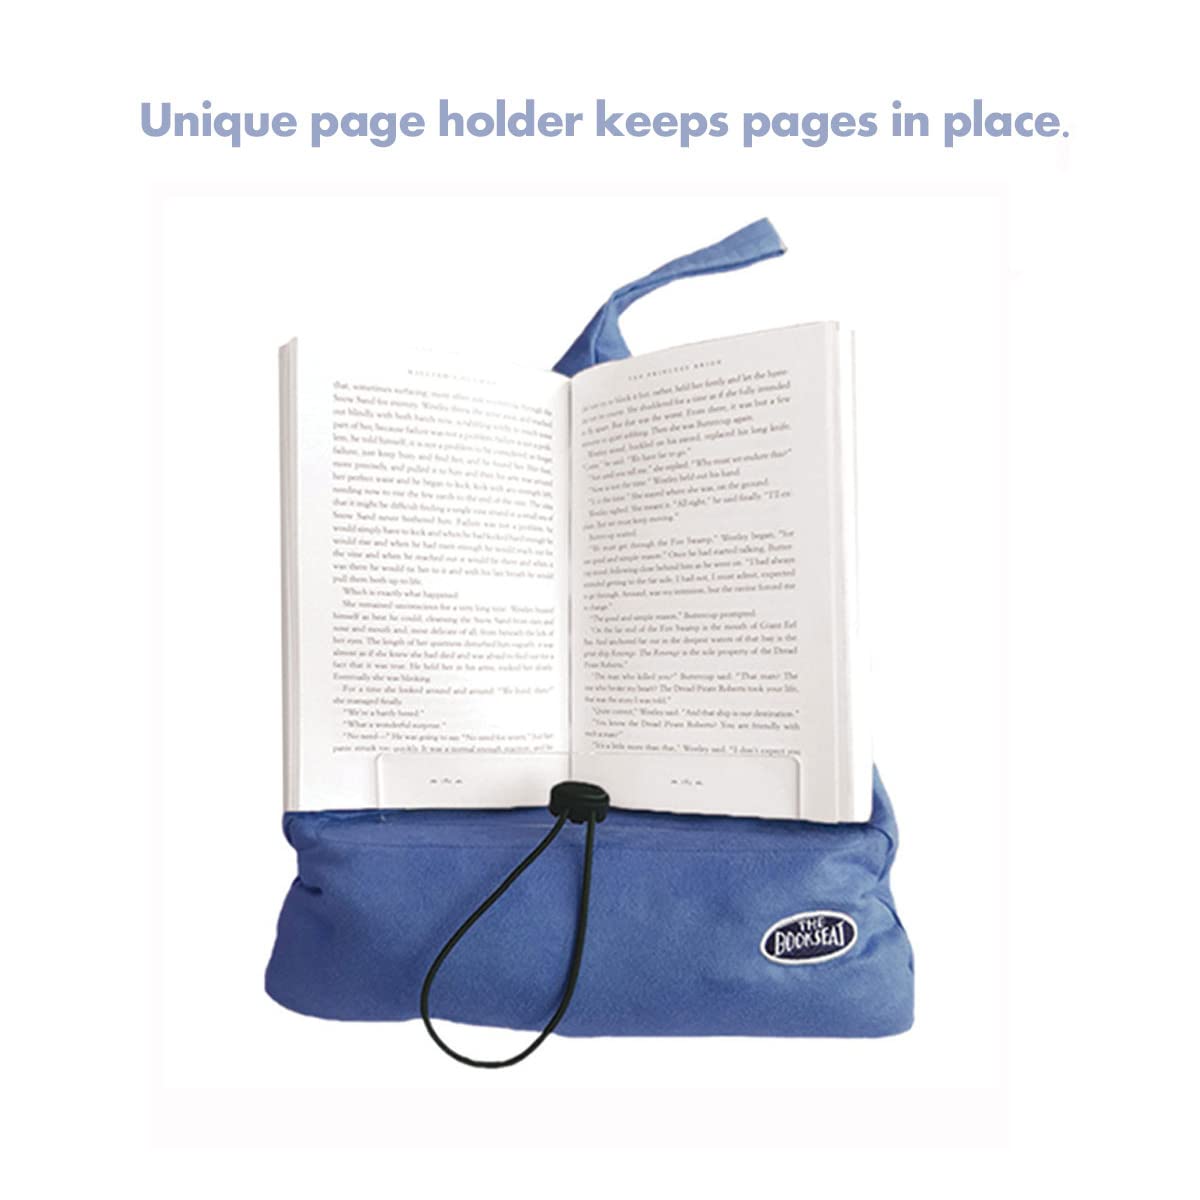 The Book Seat - The Most Comfortable Way to Read, Hands Free! - Turquoise